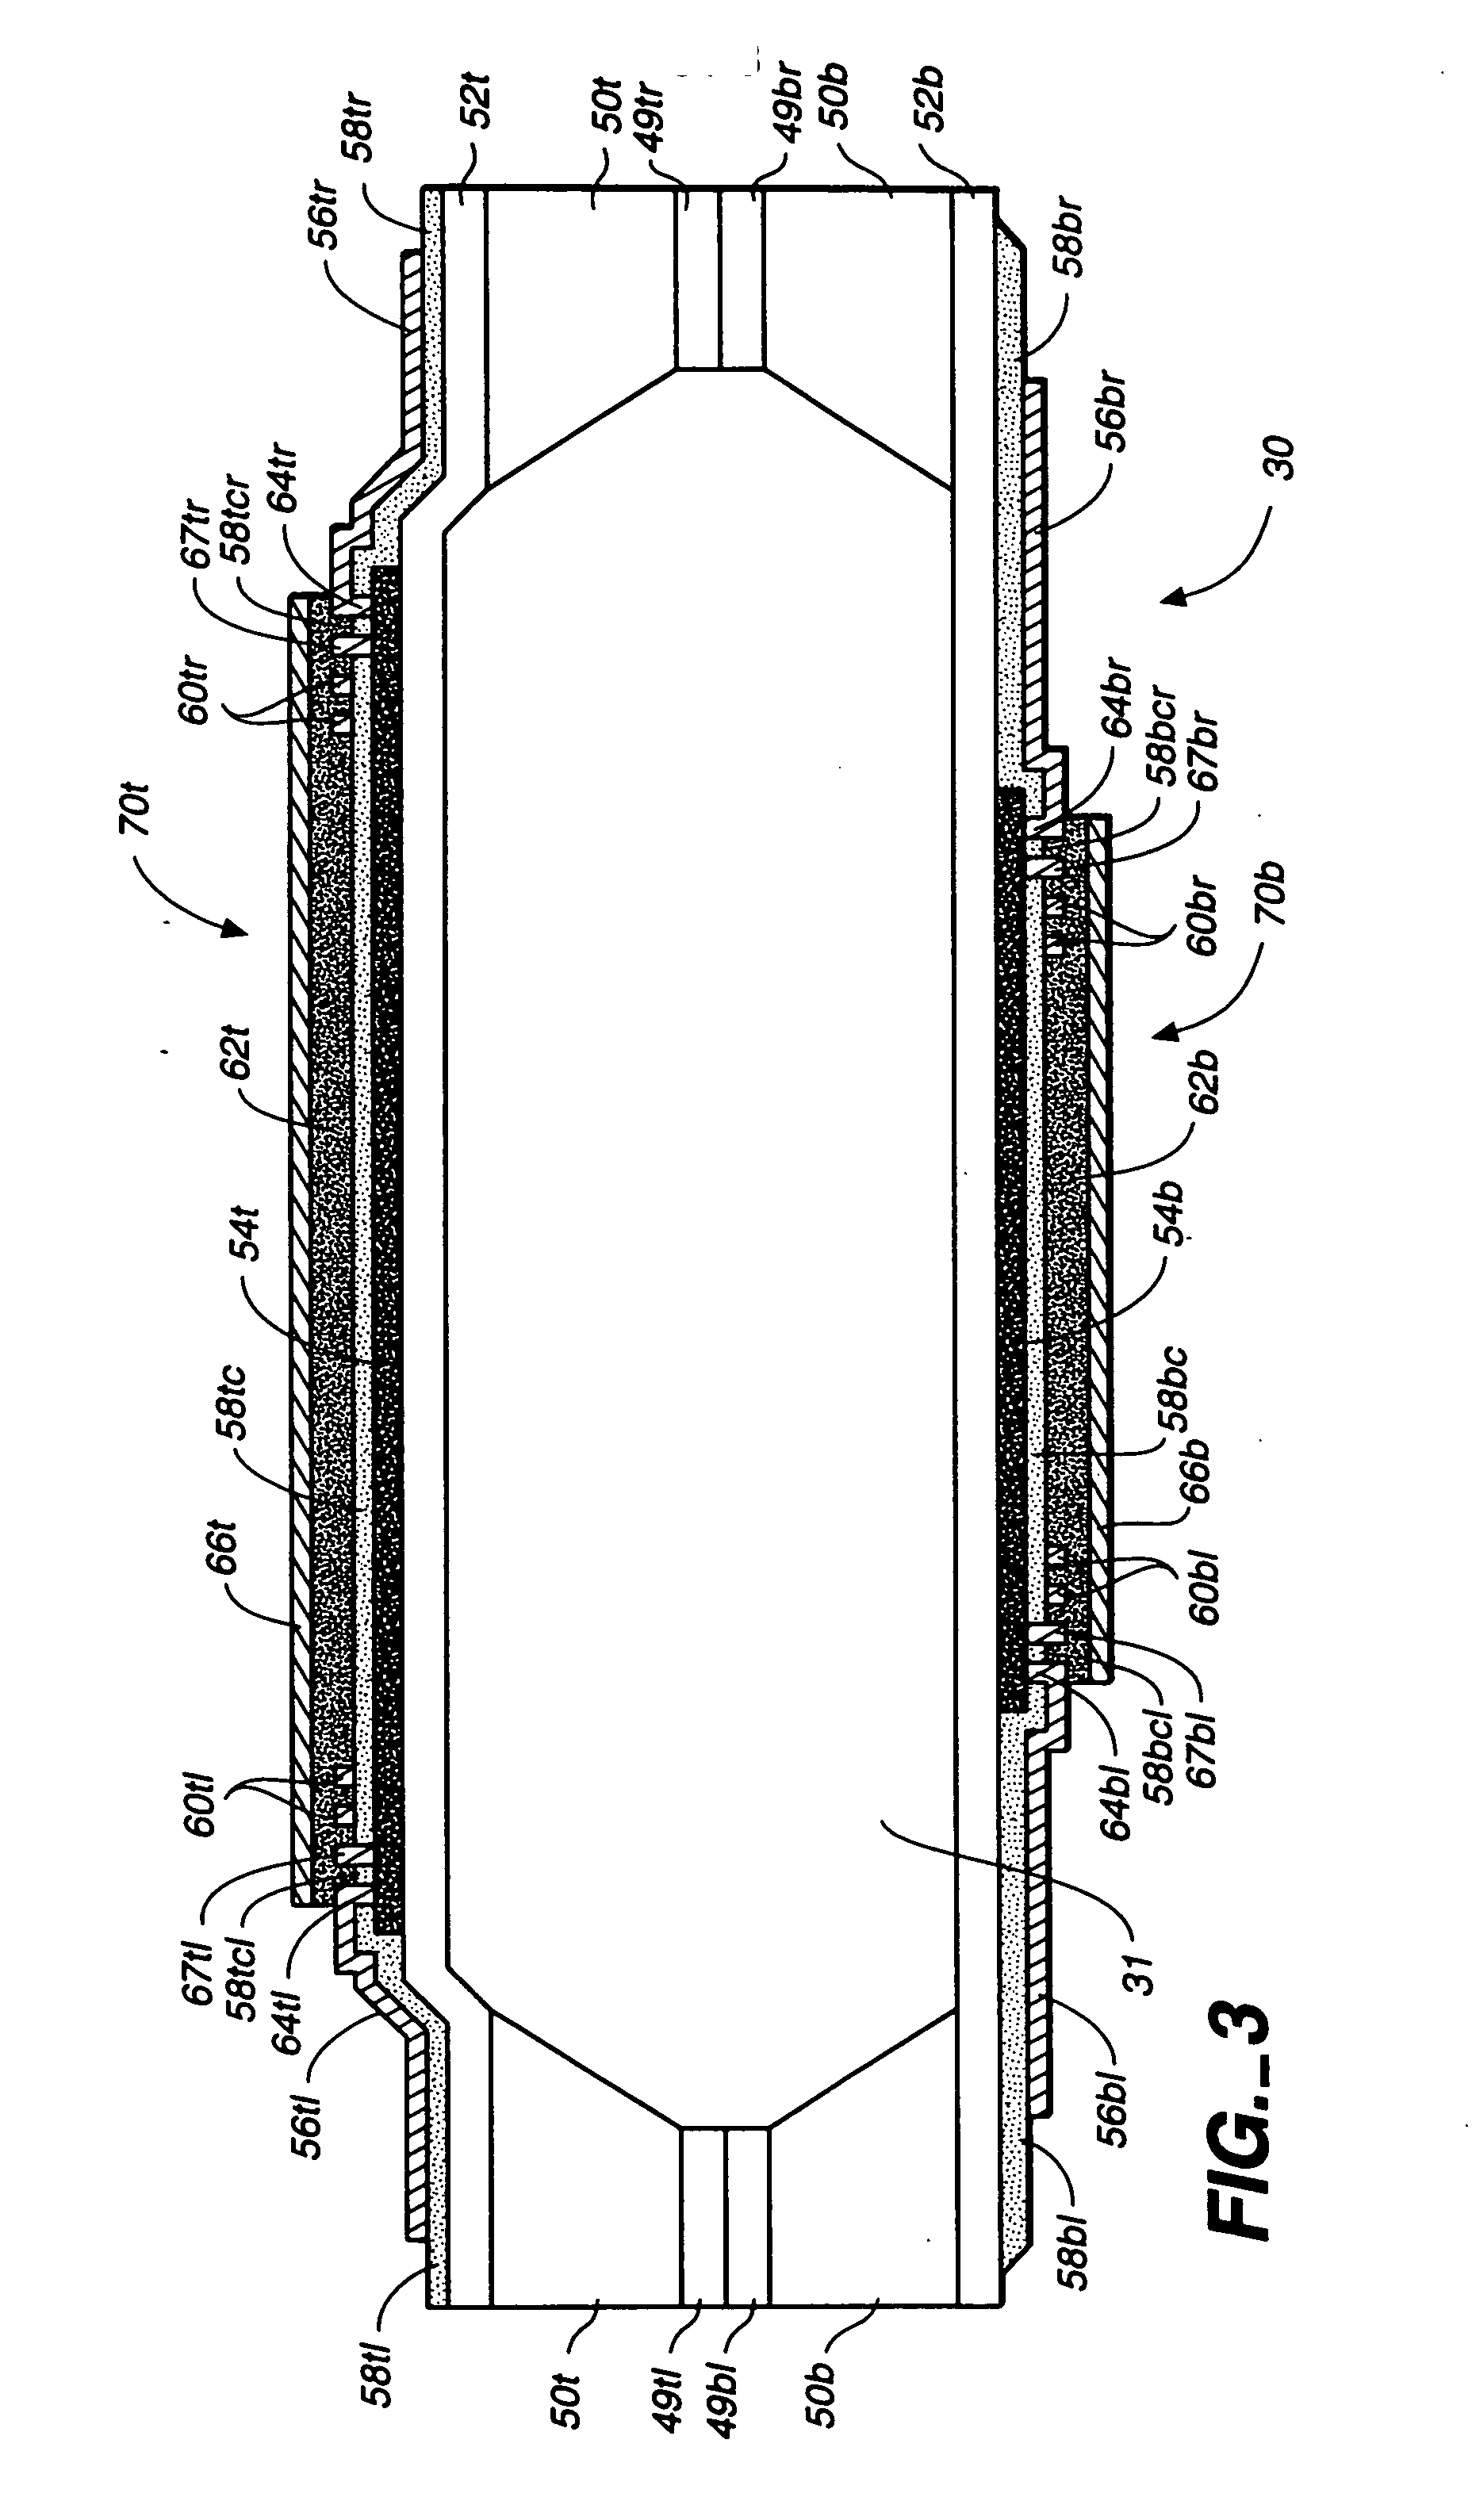 Microfabricated reactor, process for manufacturing the reactor, and method of amplification